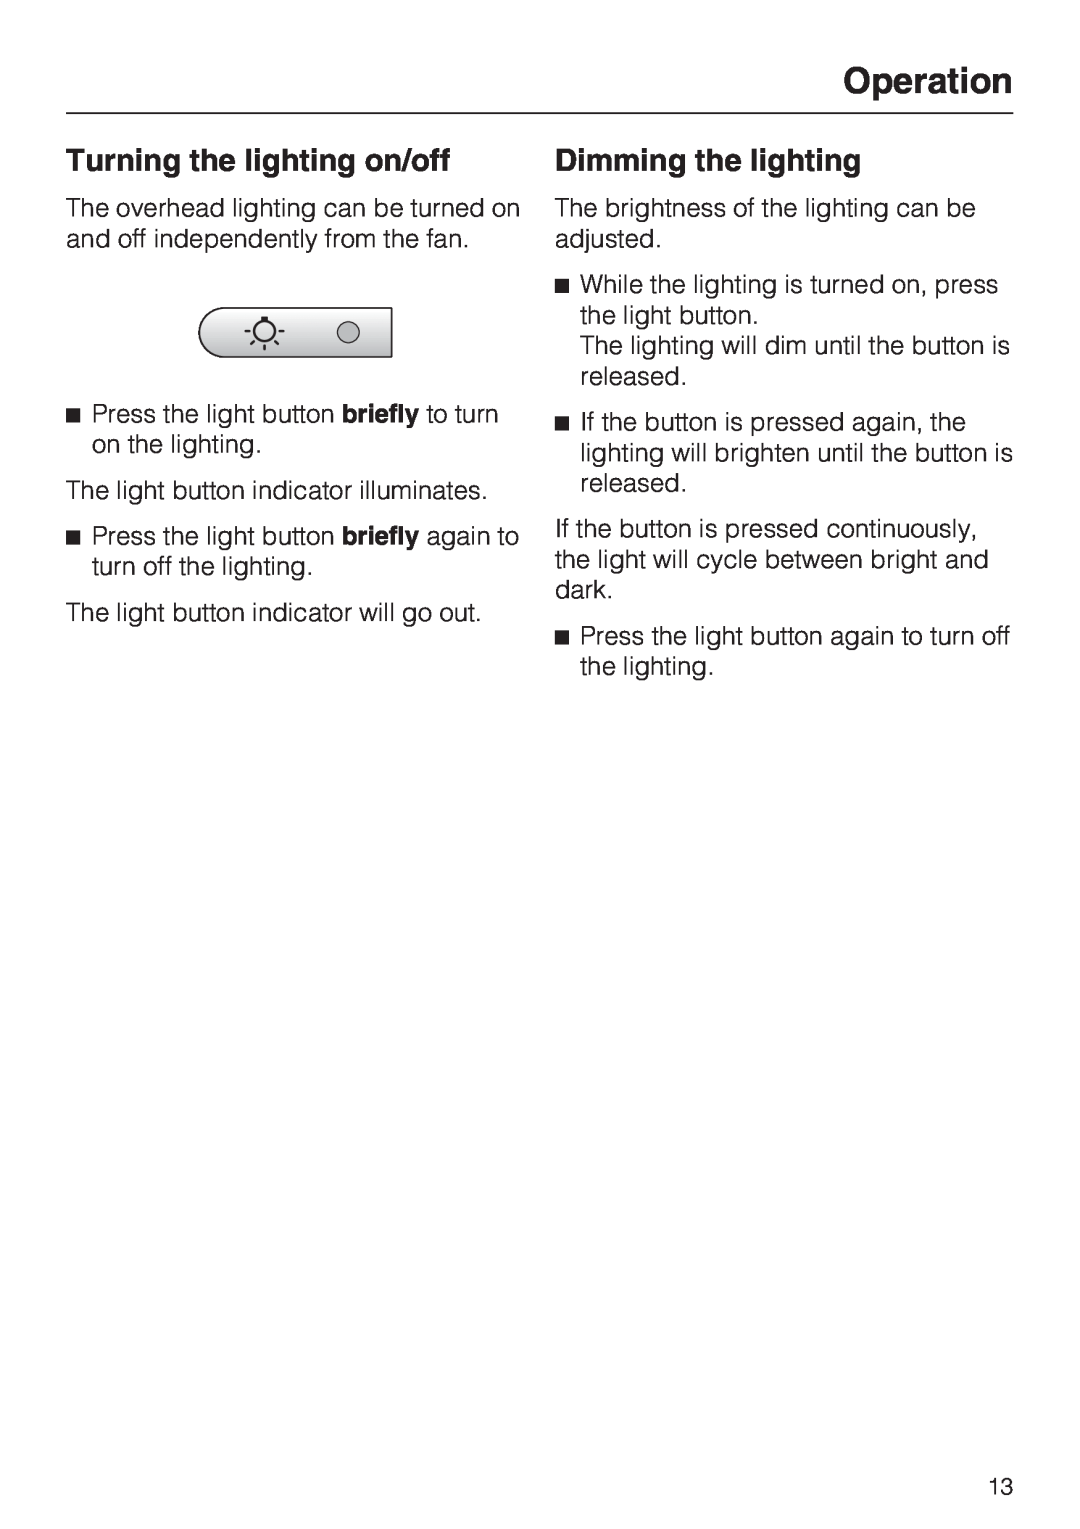 Miele DA 220-4 installation instructions Turning the lighting on/off, Dimming the lighting, Operation 